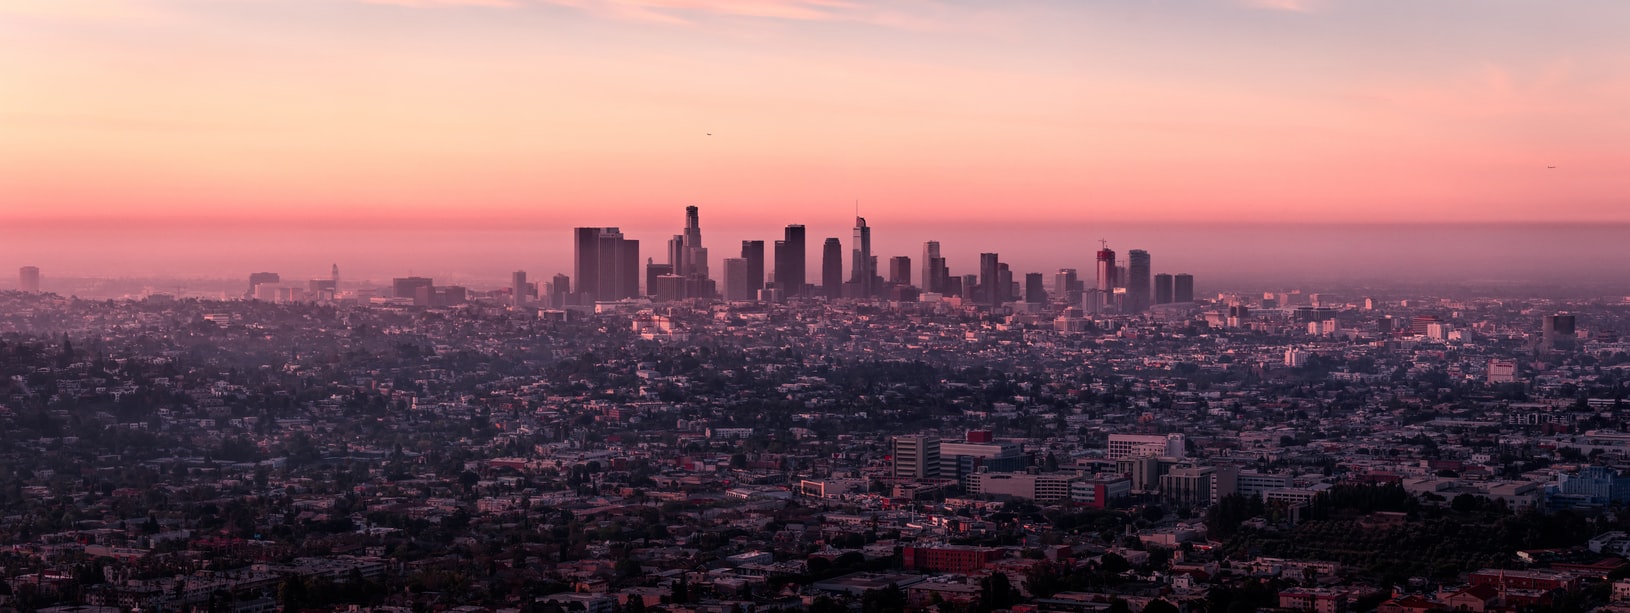 The Los Angeles skyline at sunset.